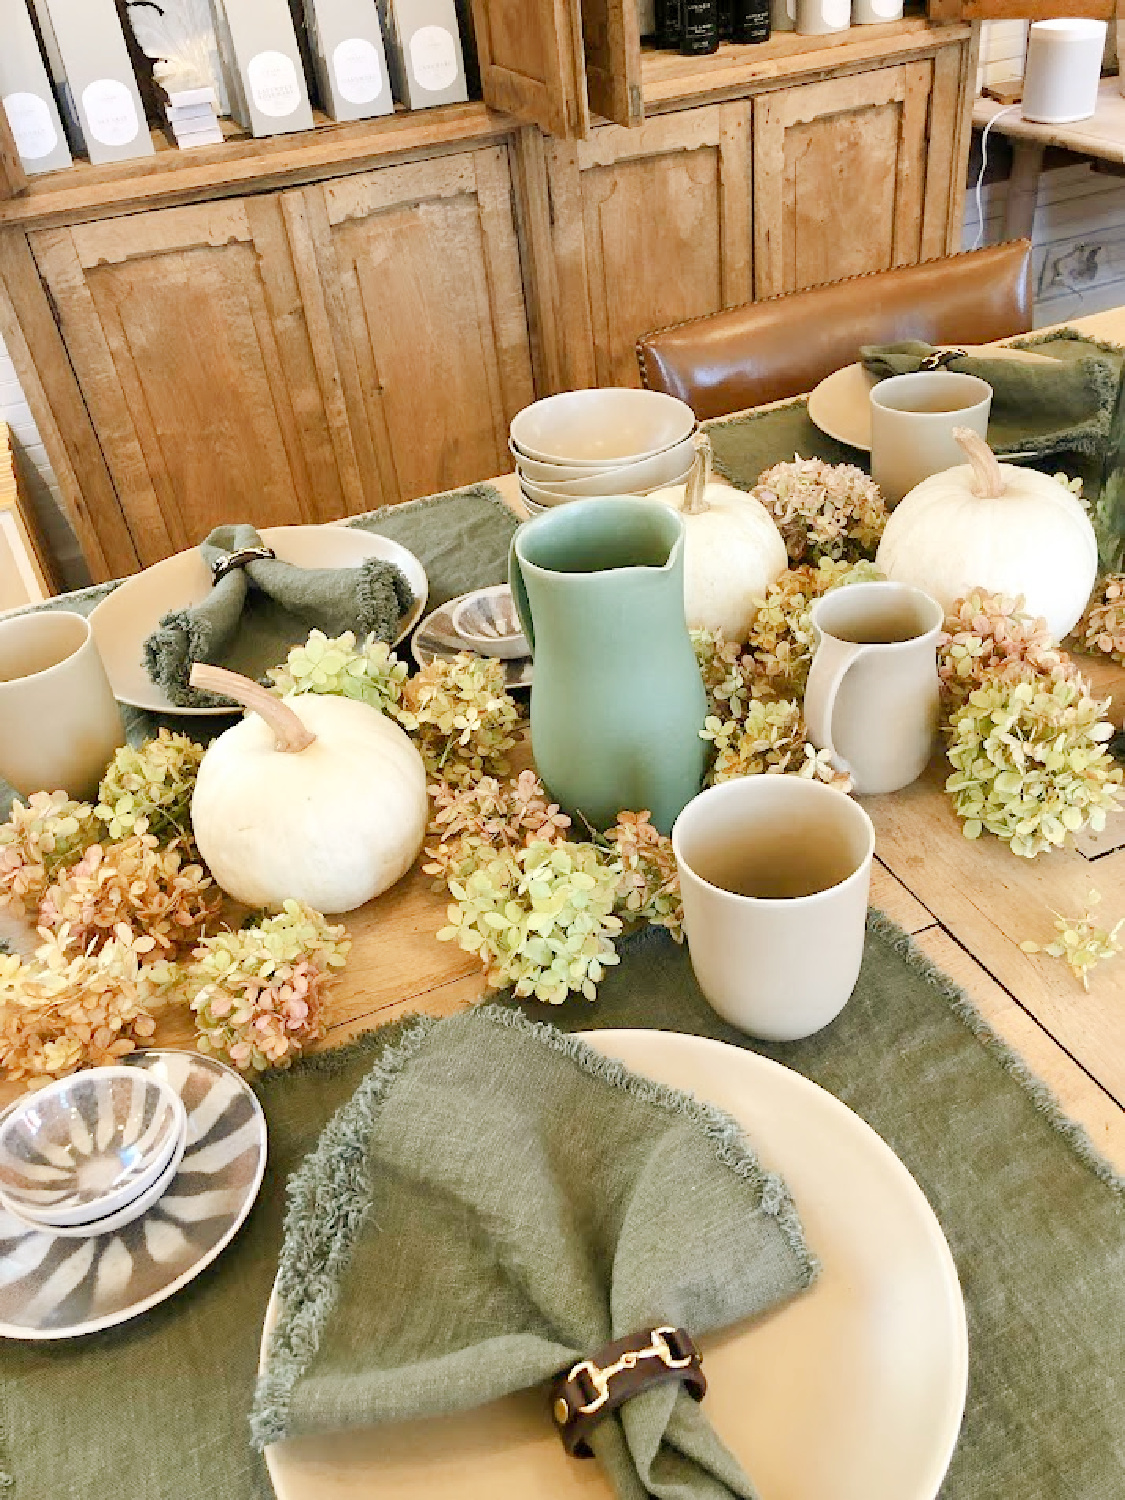 Fall tablescape with white pumpkins, French dishes, and hydrangea - Patina Home & Garden in Leiper's Fork near Franklin, TN. #patinahome